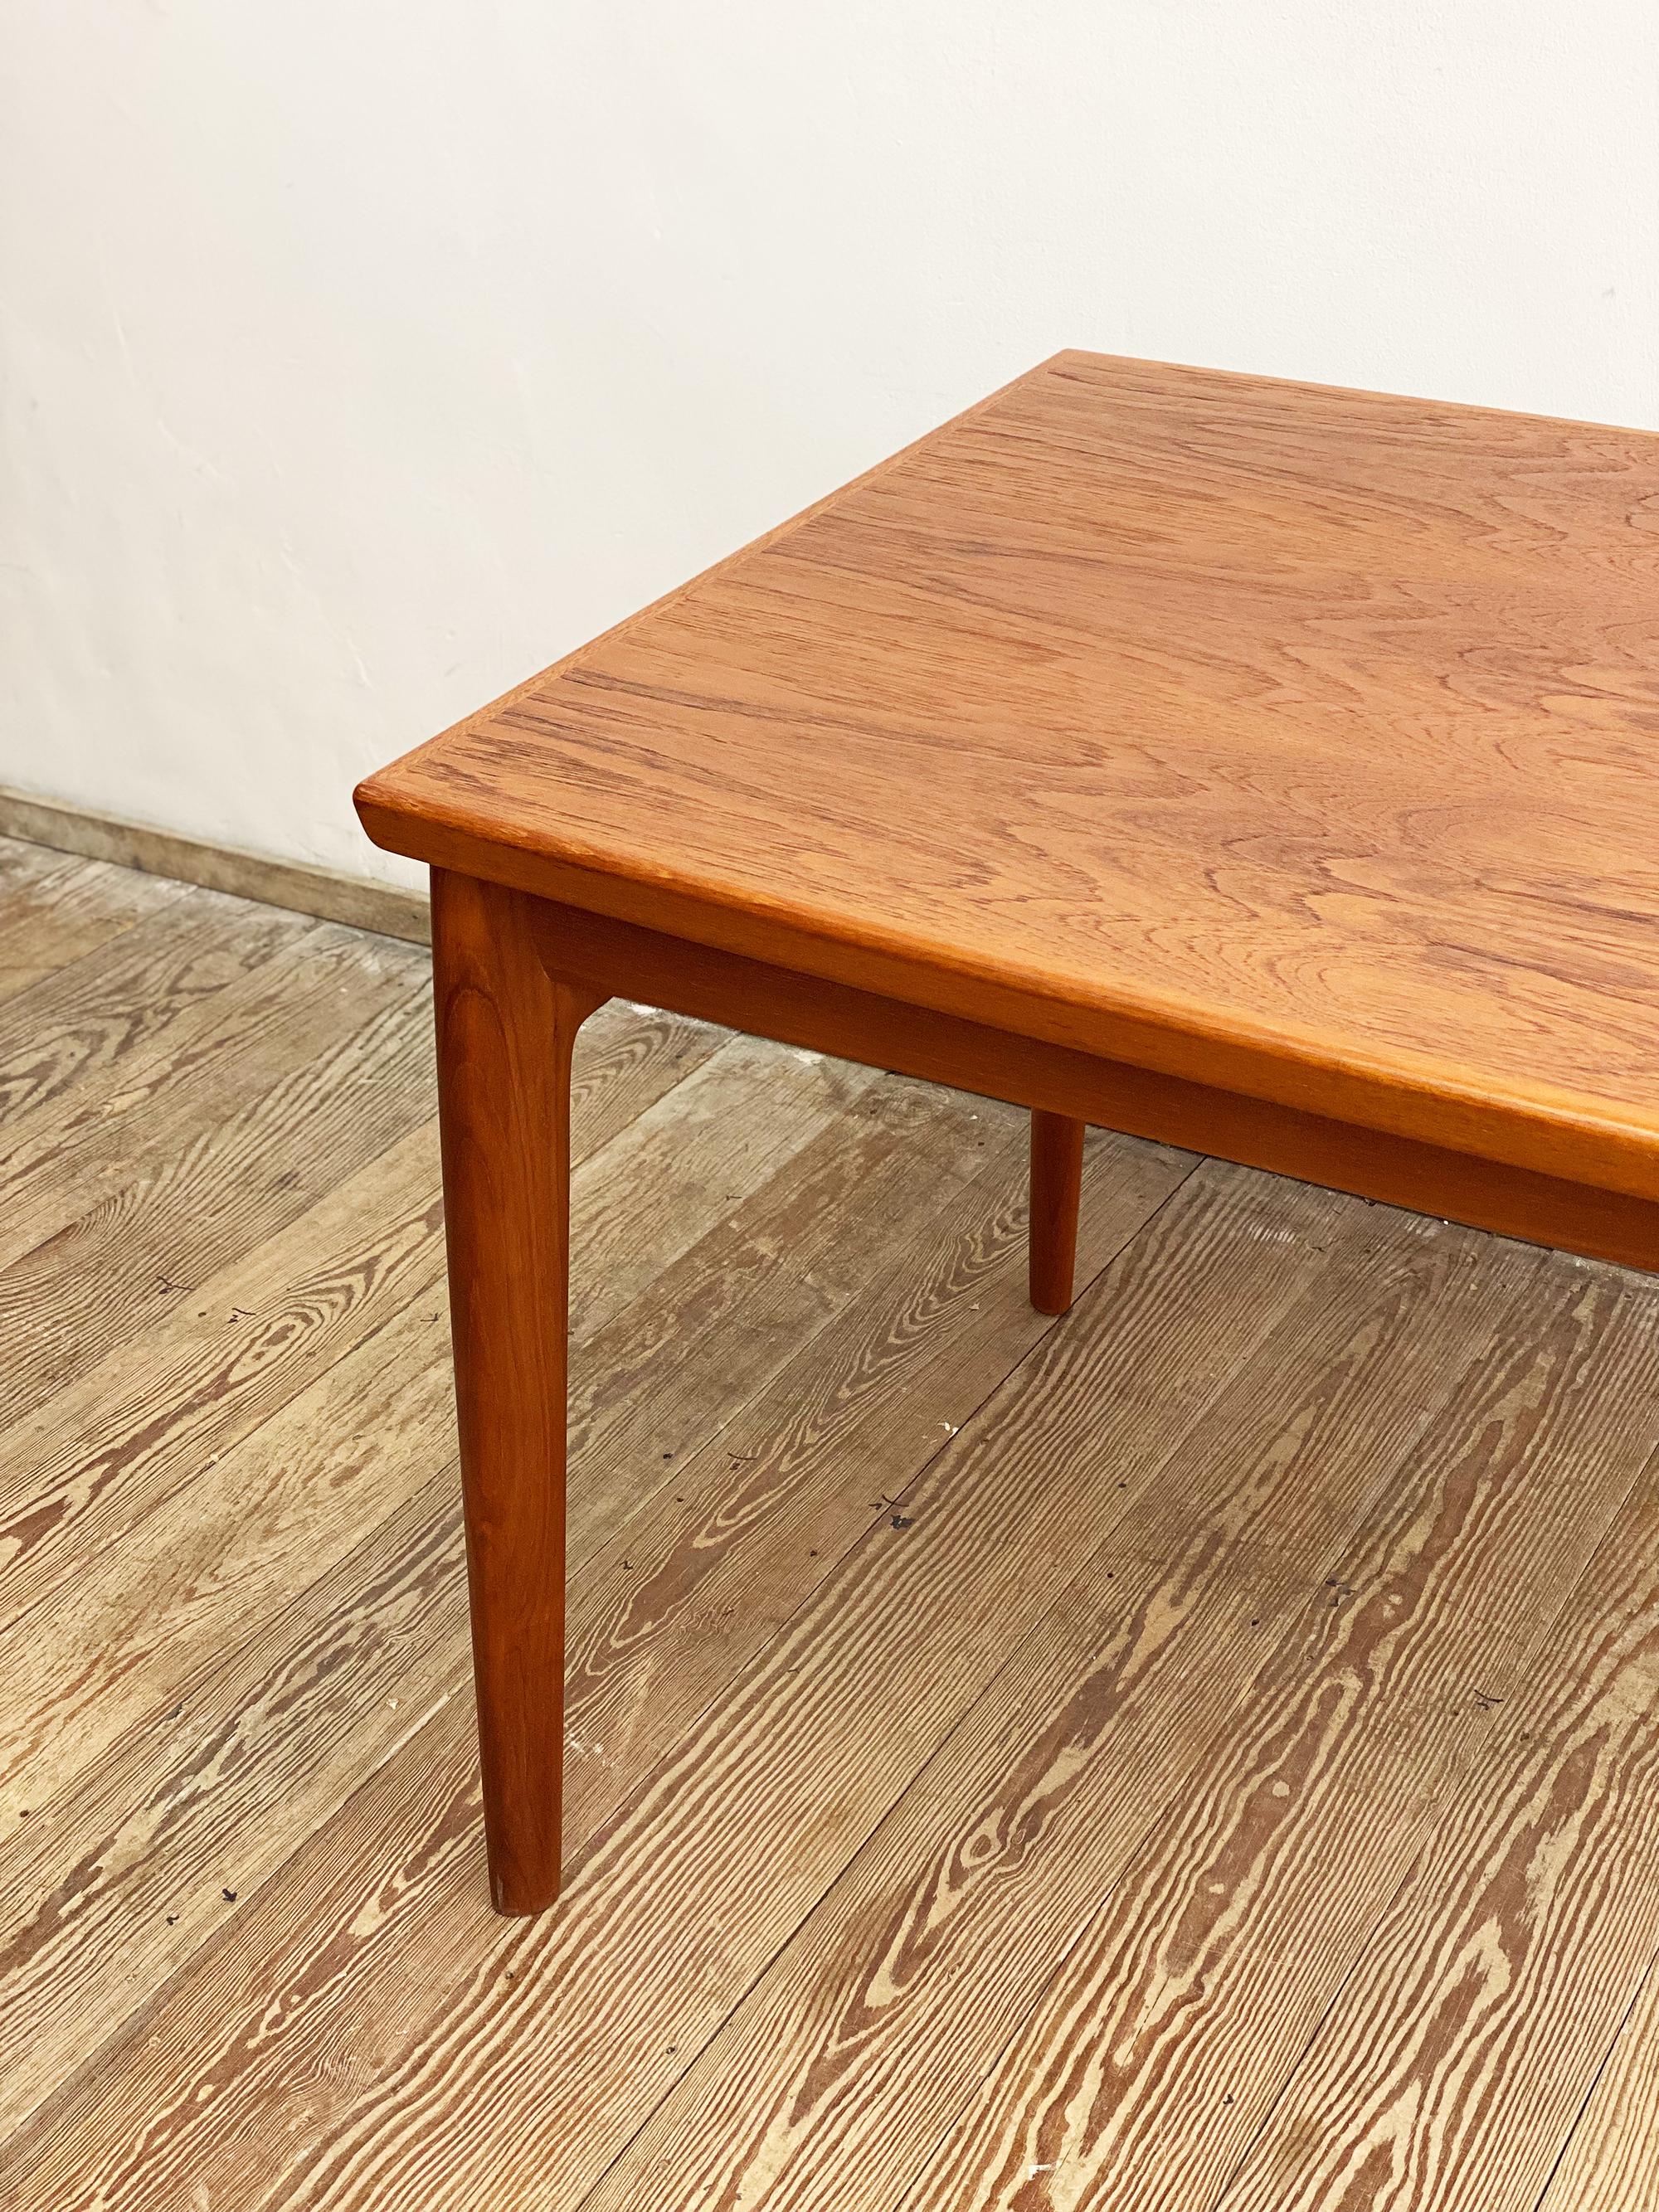 Mid-Century Extendable Teak Dining Table, Grete Jalk, Glostrup, Denmark, 1950s In Good Condition For Sale In München, Bavaria